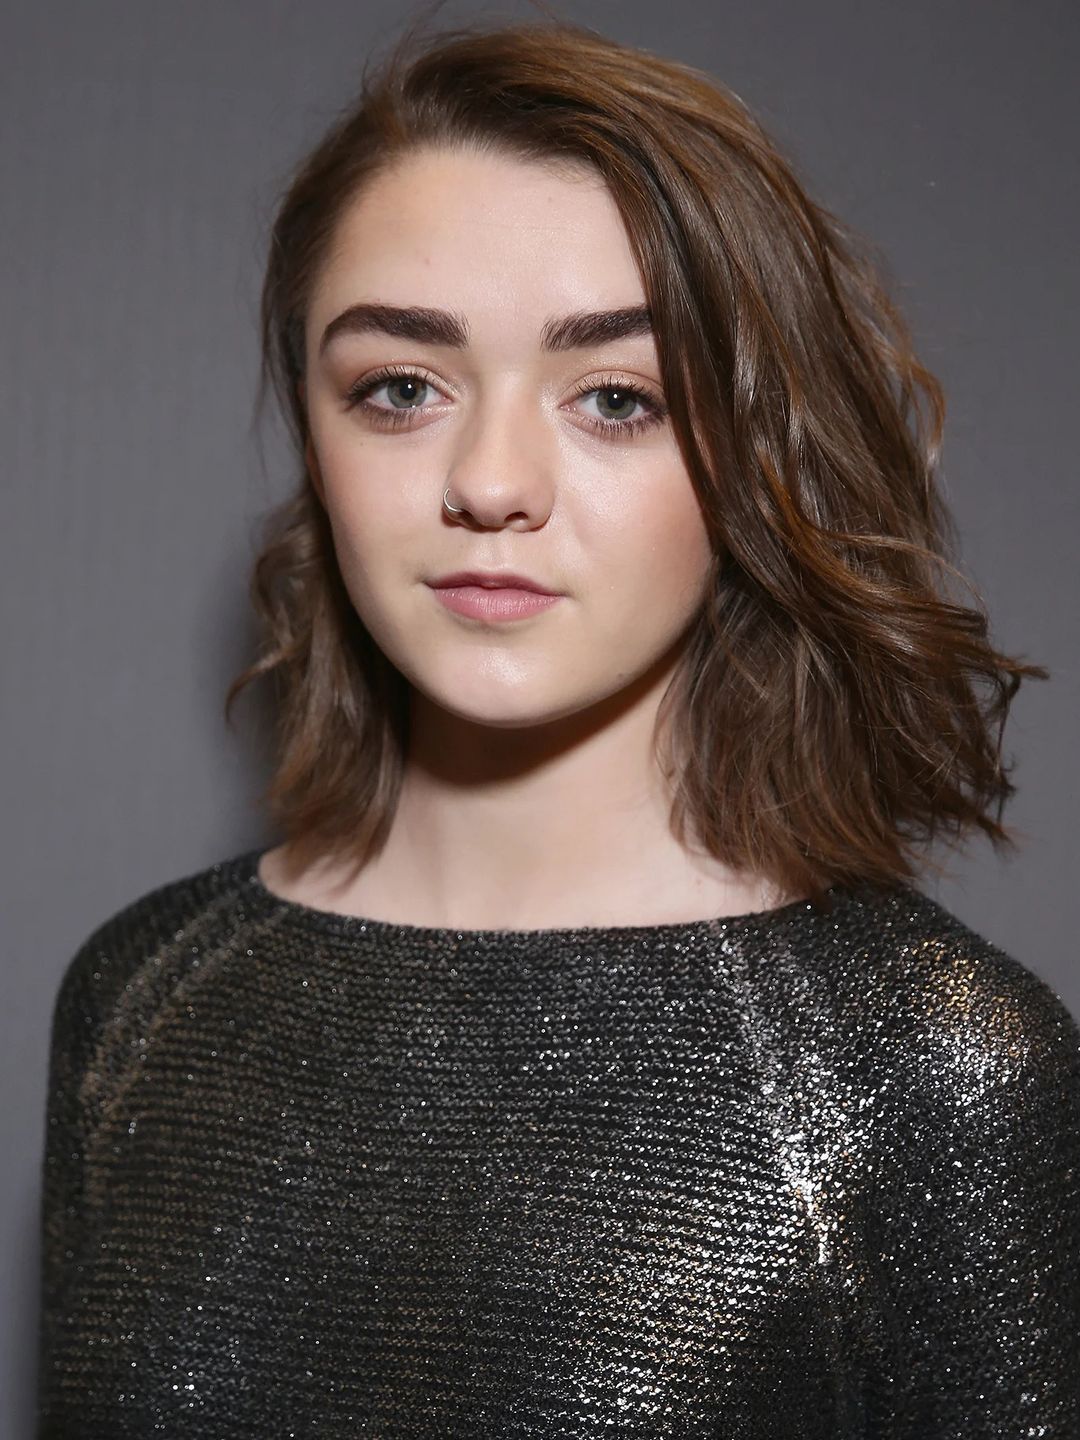 Maisie Williams young age